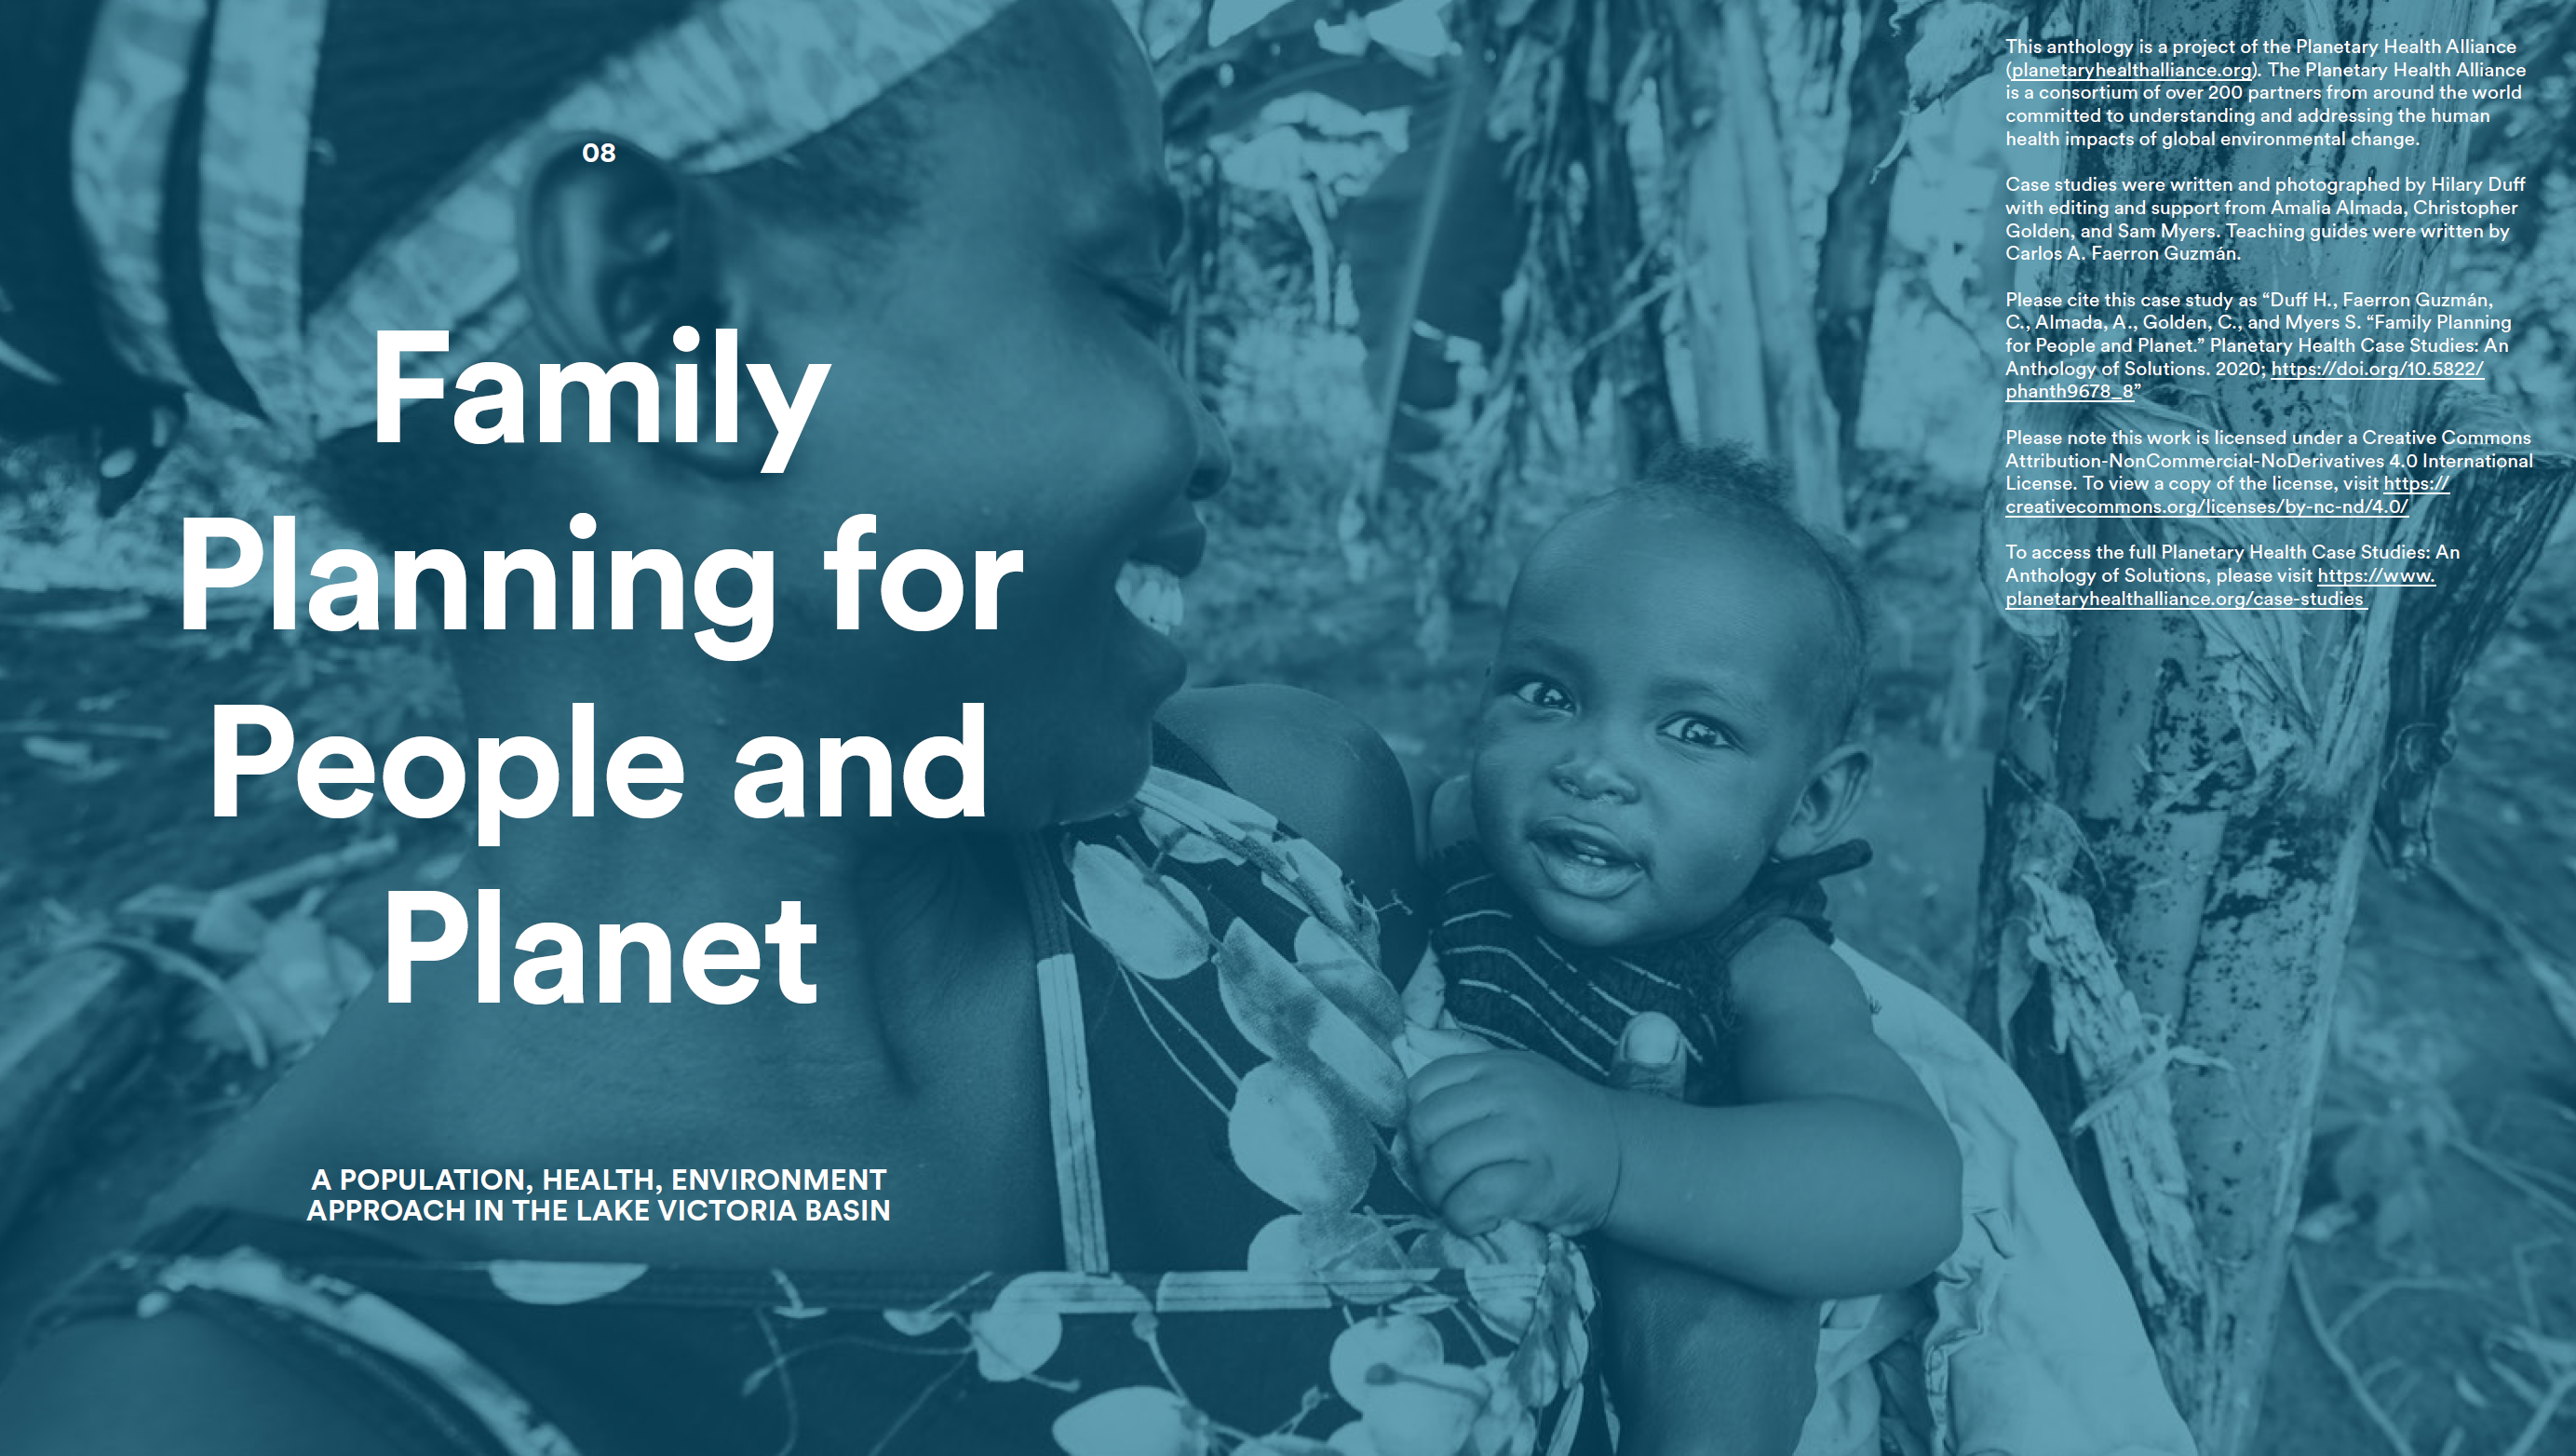 Case Study 08 - Family Planning for People and Planet